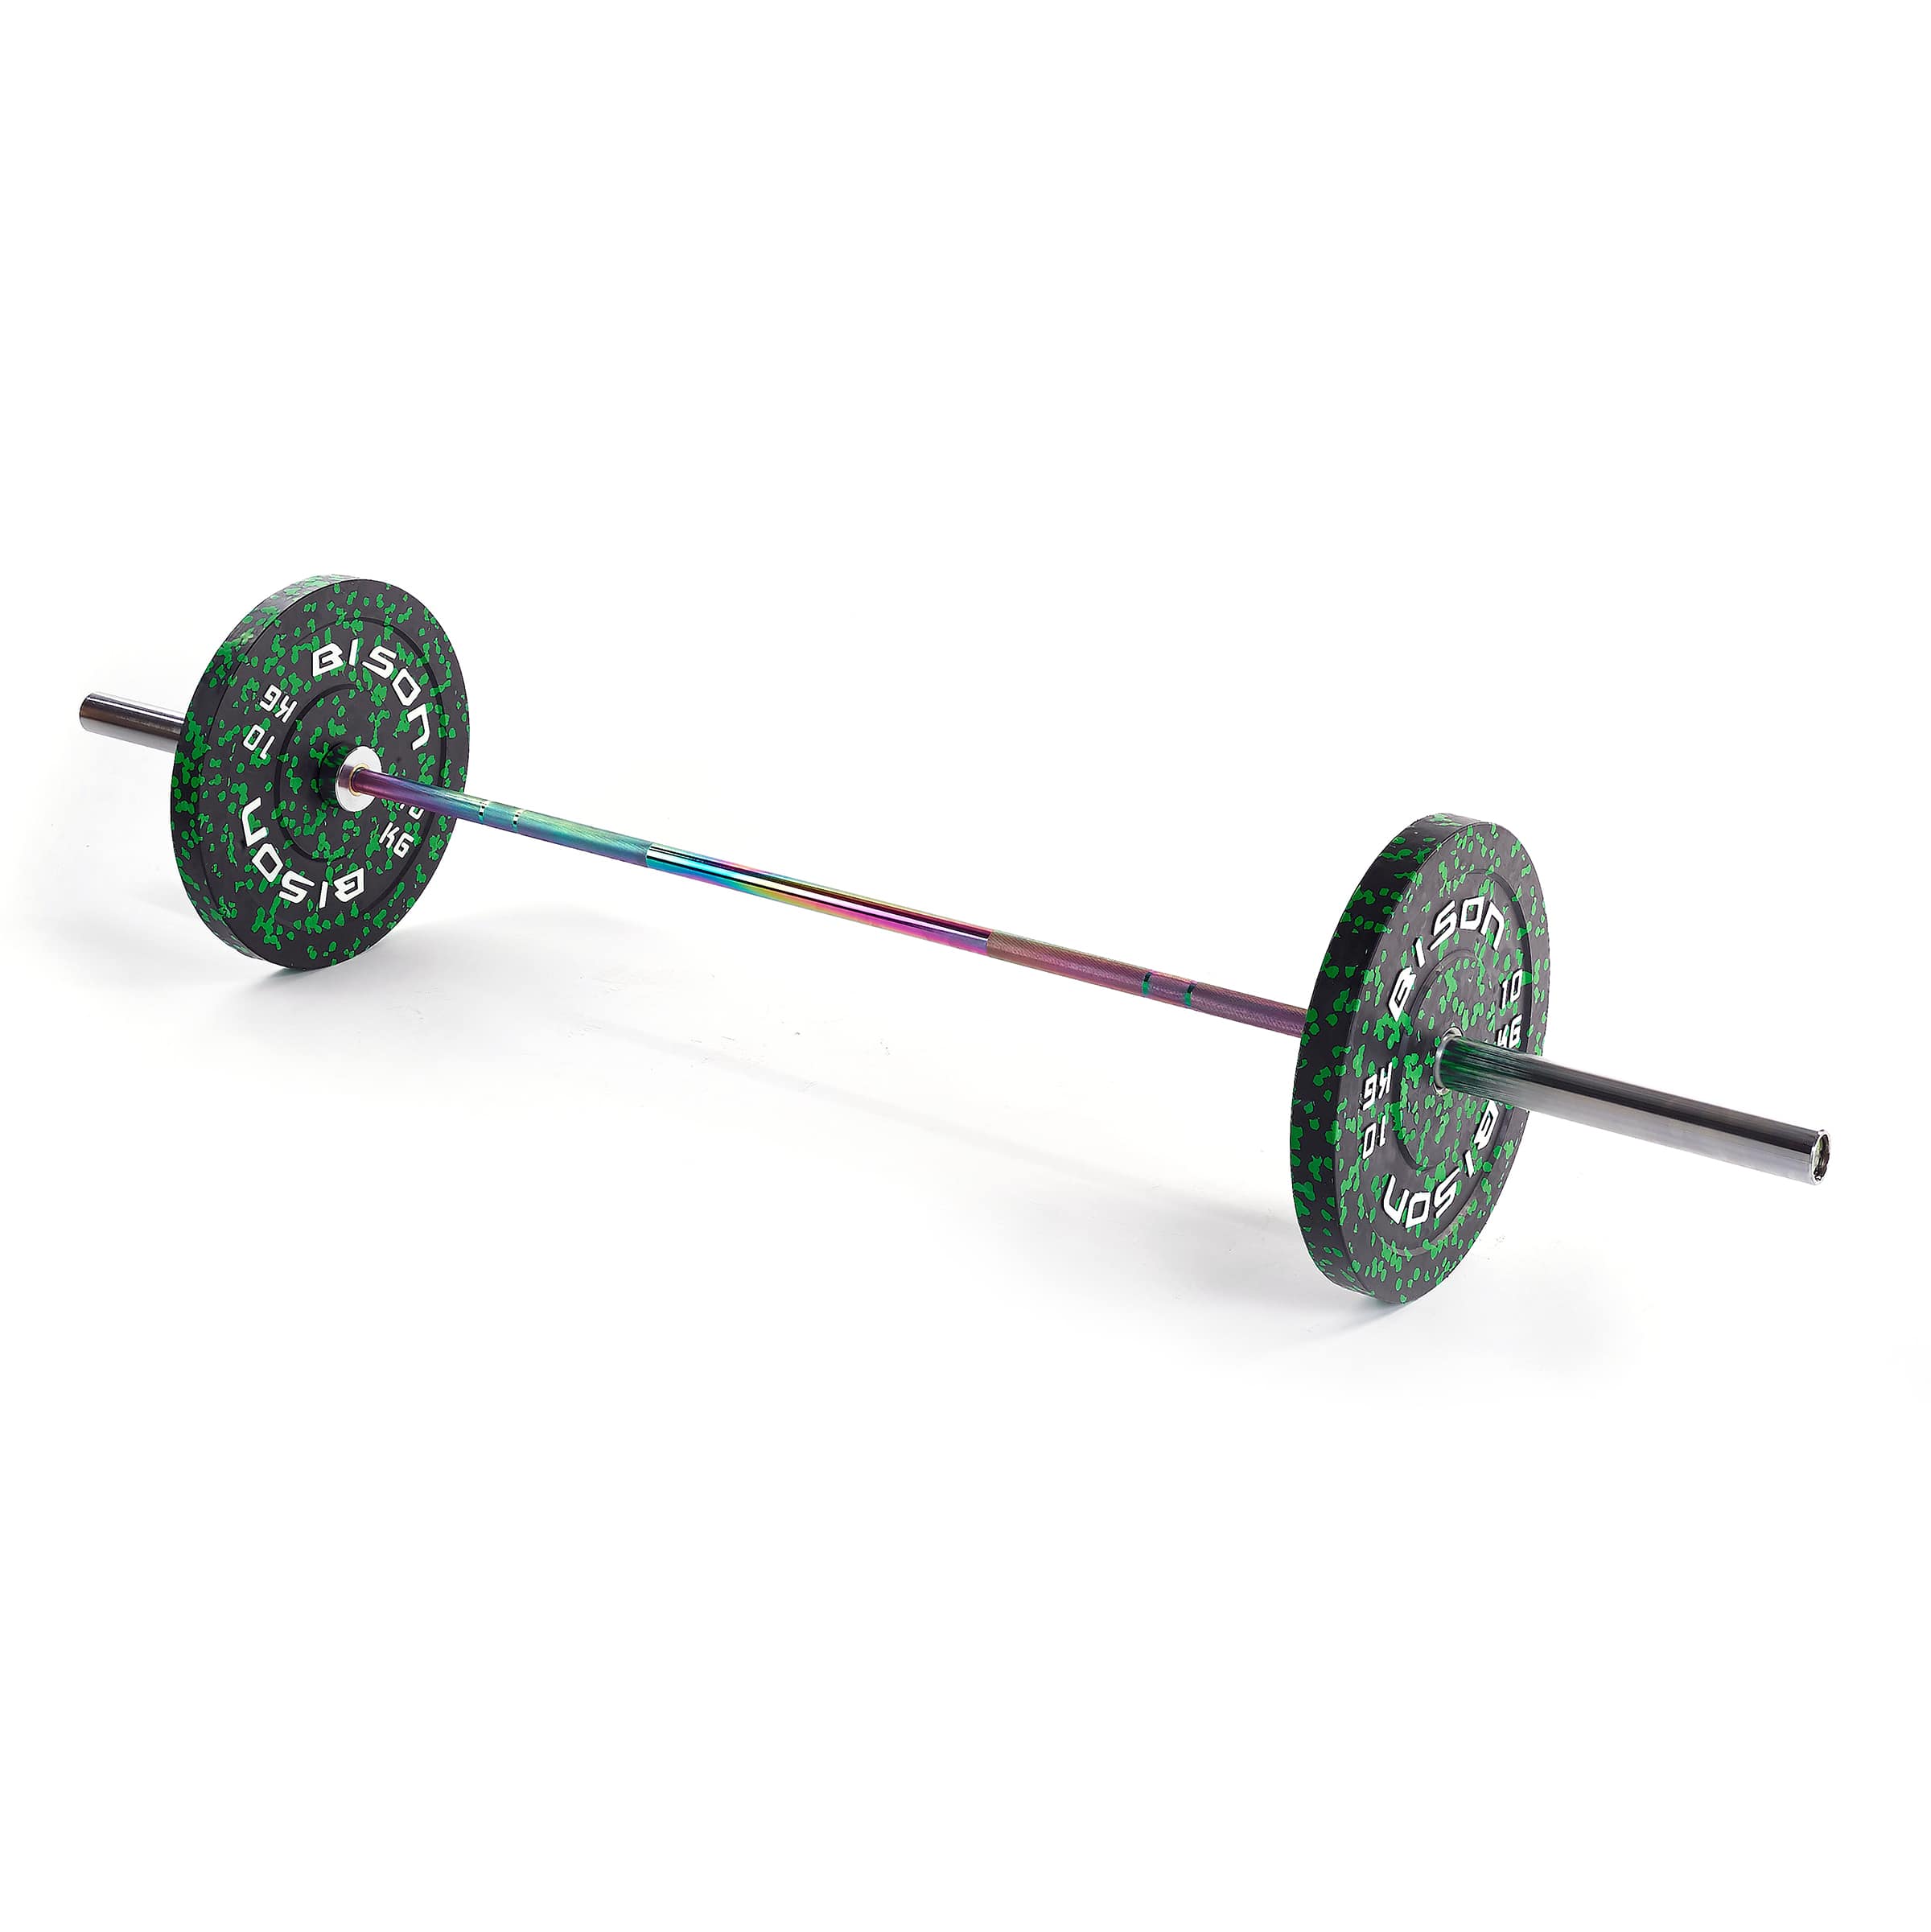 The Infinity Bar - 15kg - Wolverson Fitness